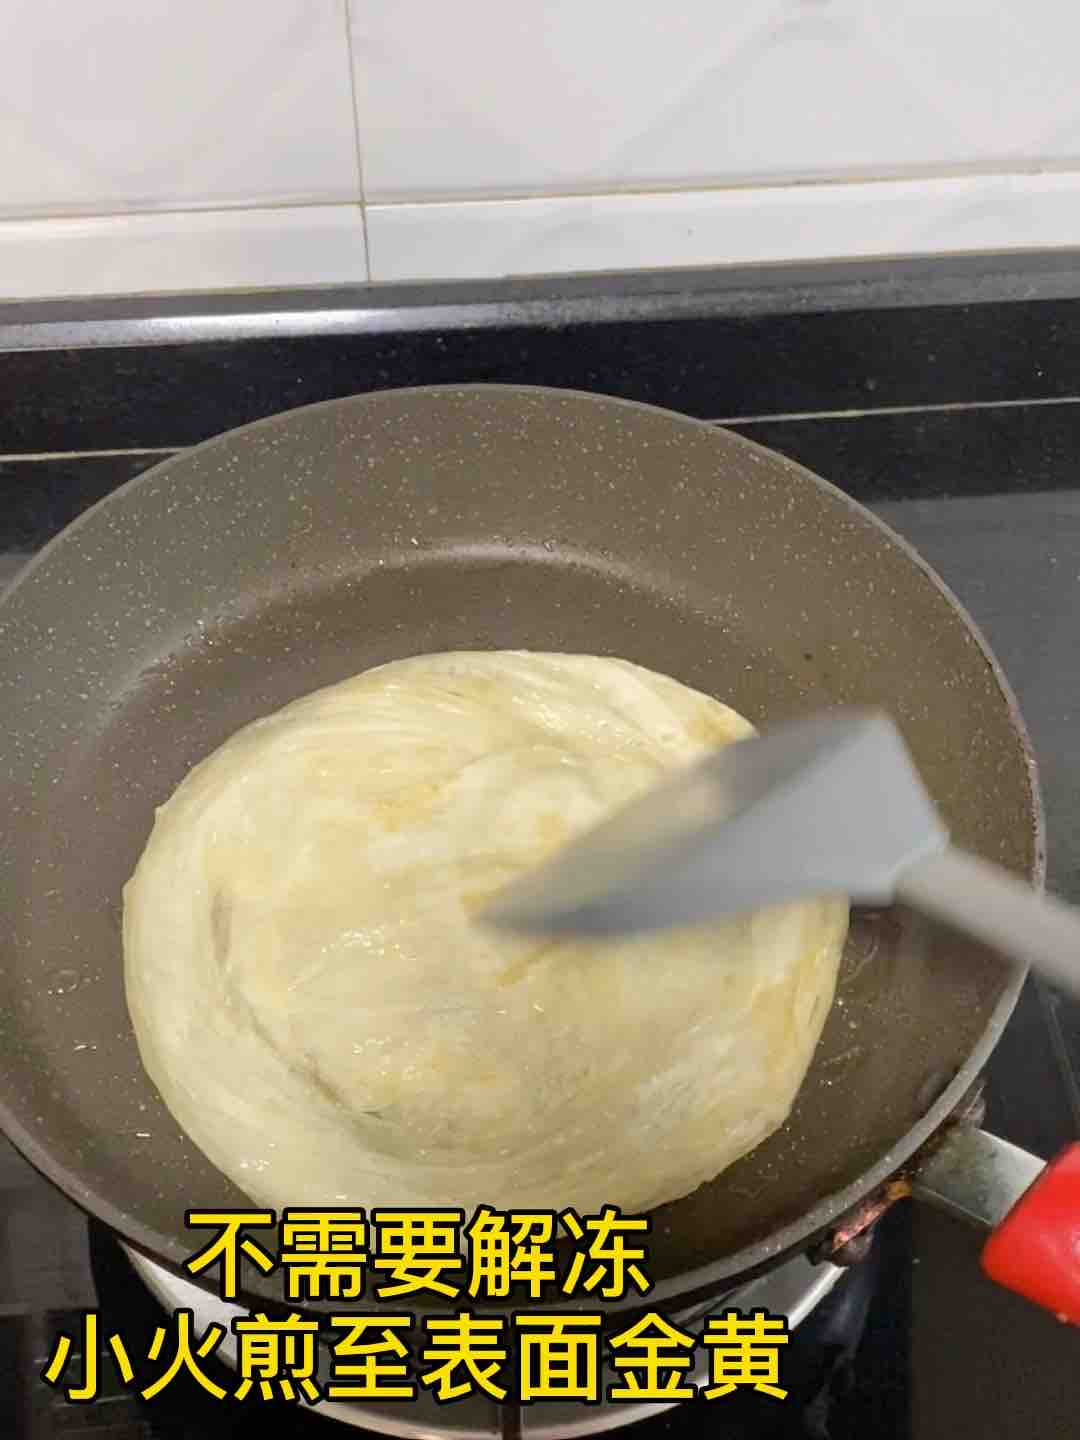 Ten Thousand Ways to Eat Hand Cakes❗️reproduce The Classic Taiwanese Flavor recipe